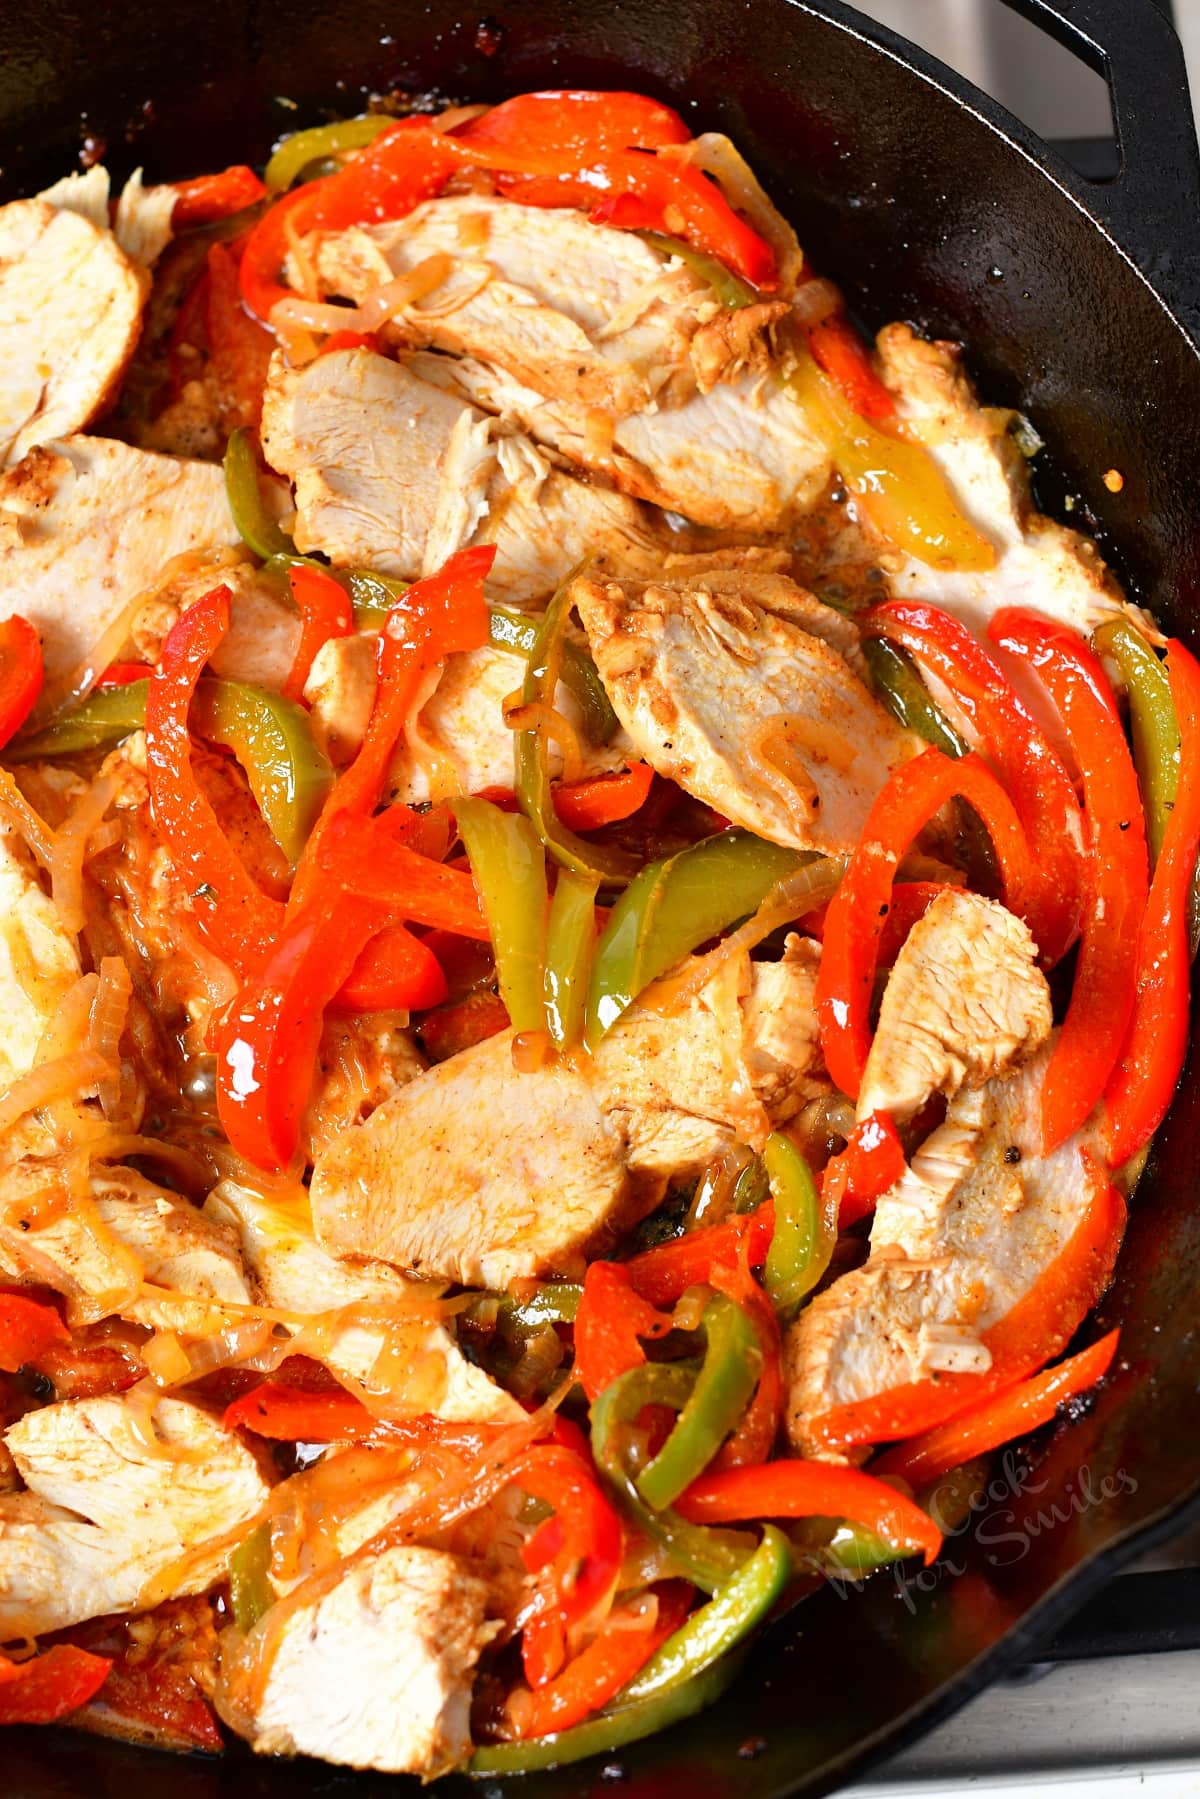 Chicken and veggies are mixed in the same skillet.